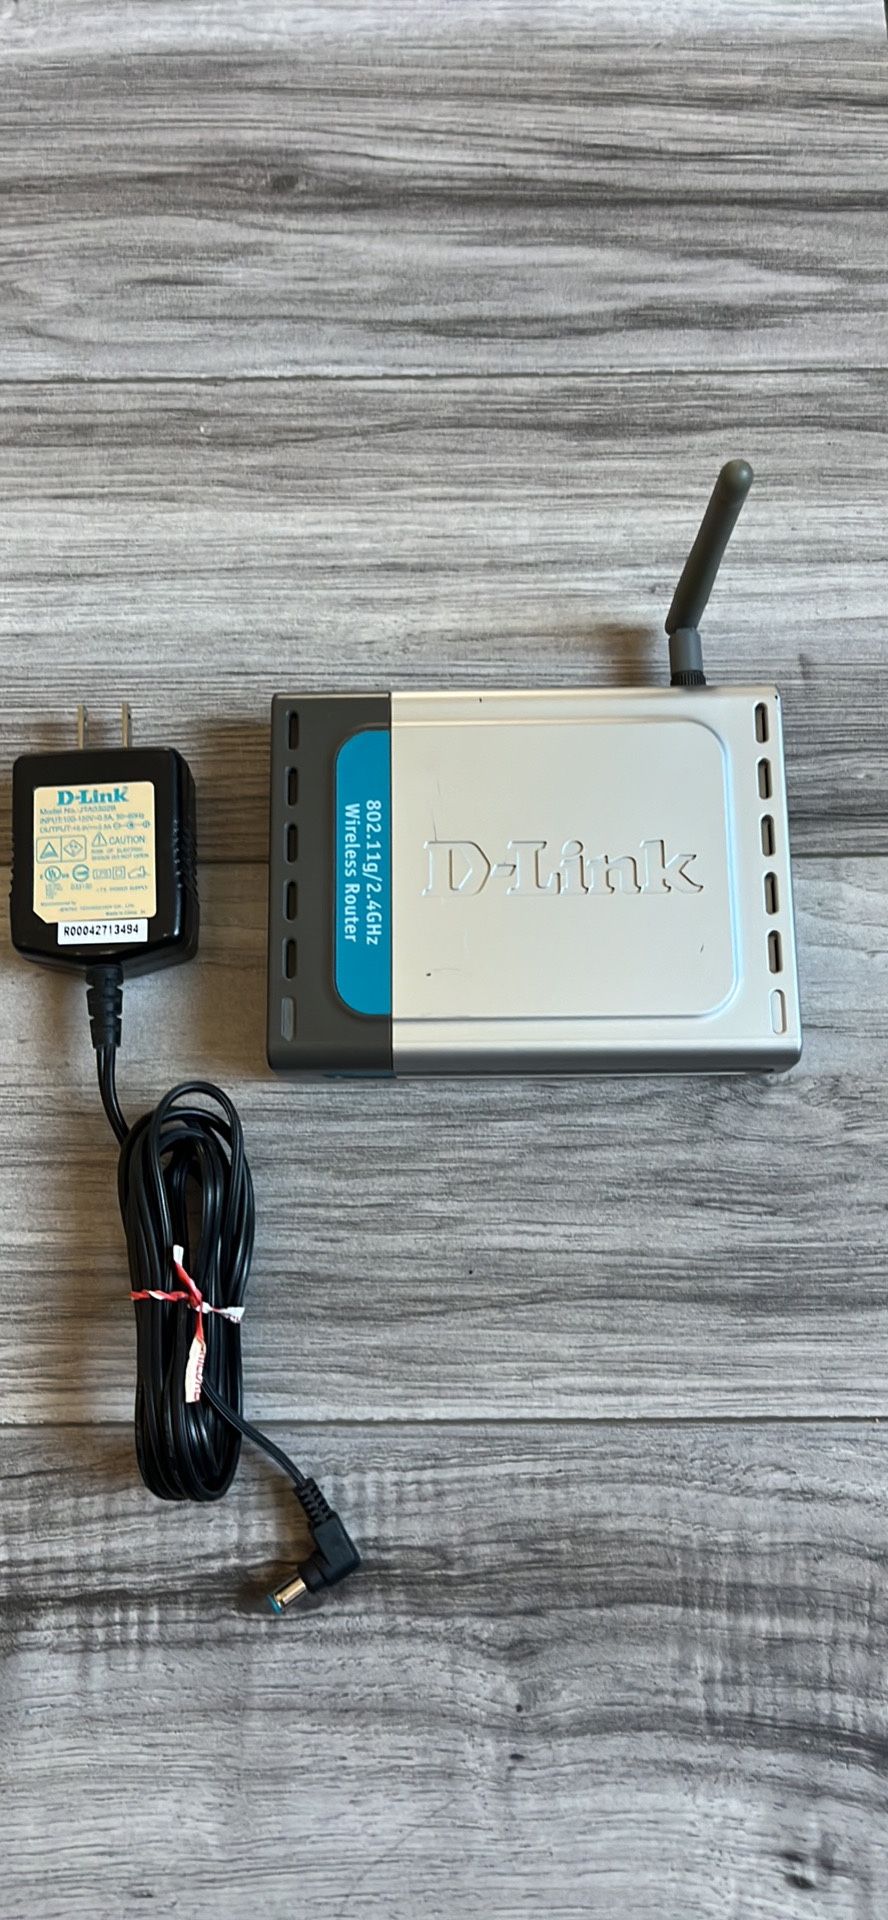 D-Link DI-524 wireless Router with AC Power Adapter